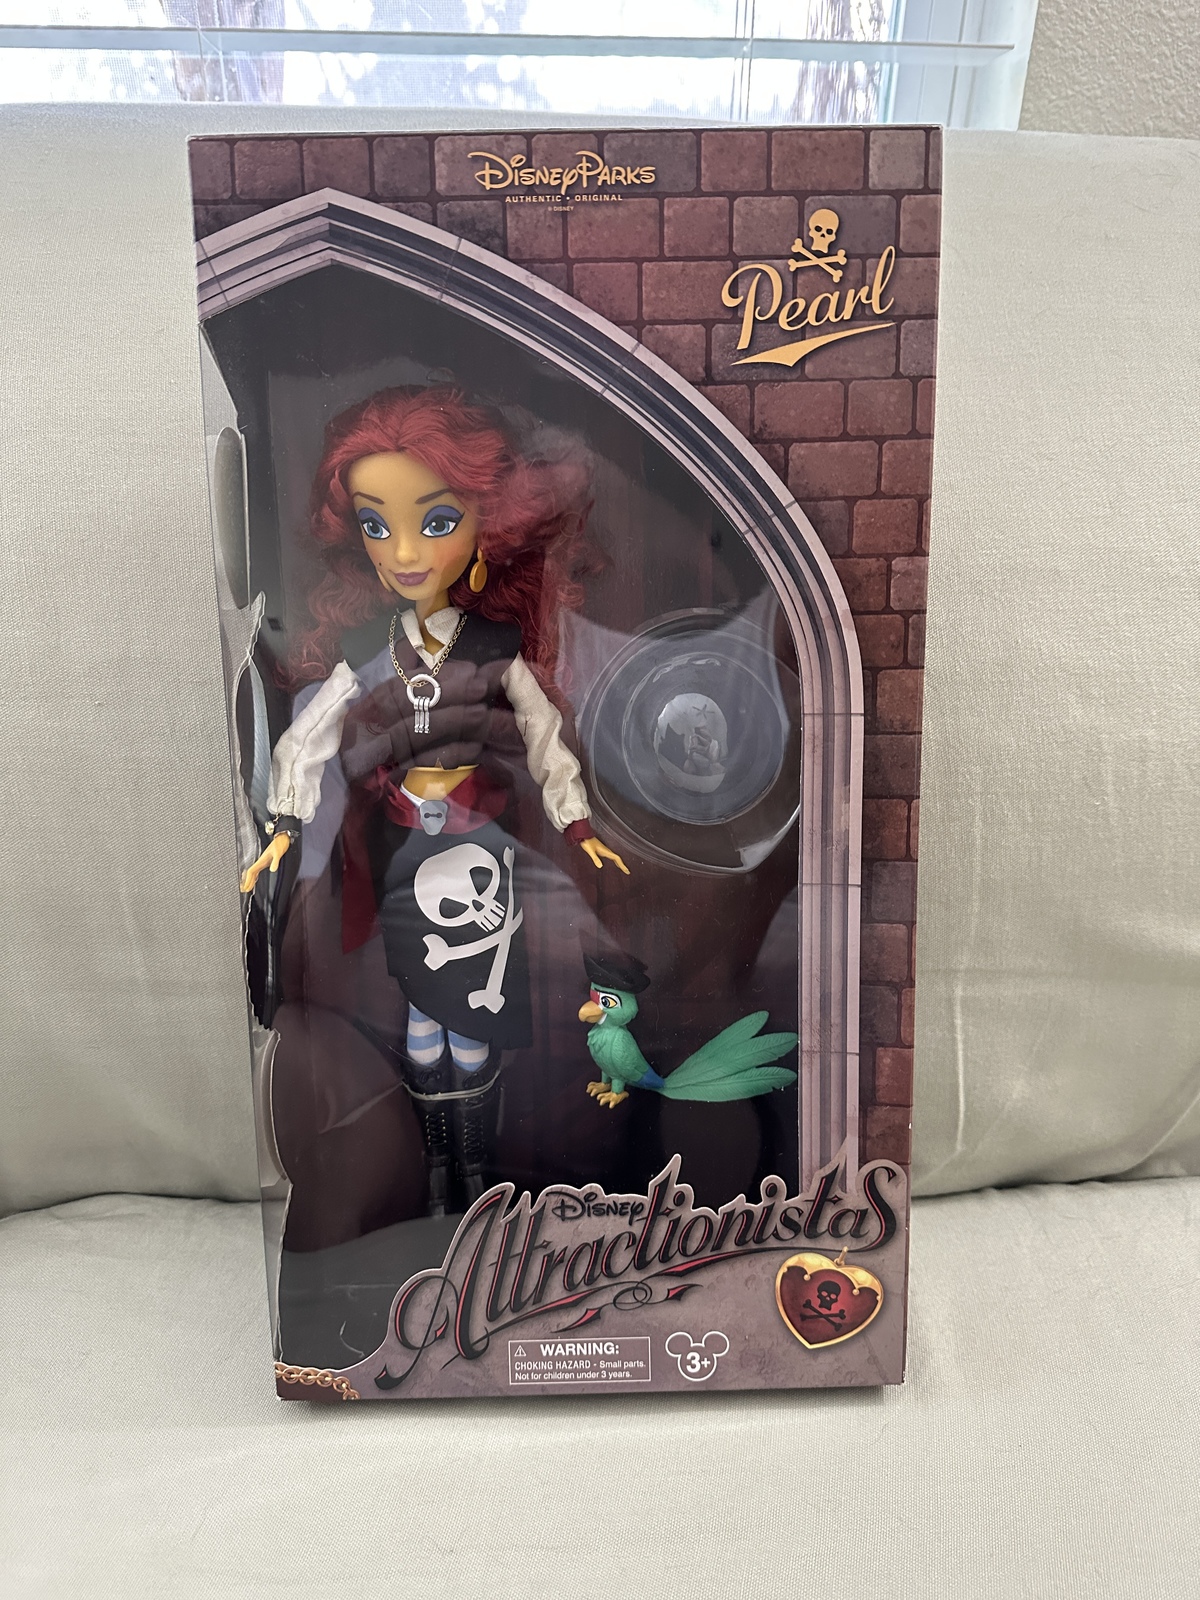 Primary image for Disney Parks Attractionistas Pearl Pirates of the Caribbean Doll NEW NIB RARE